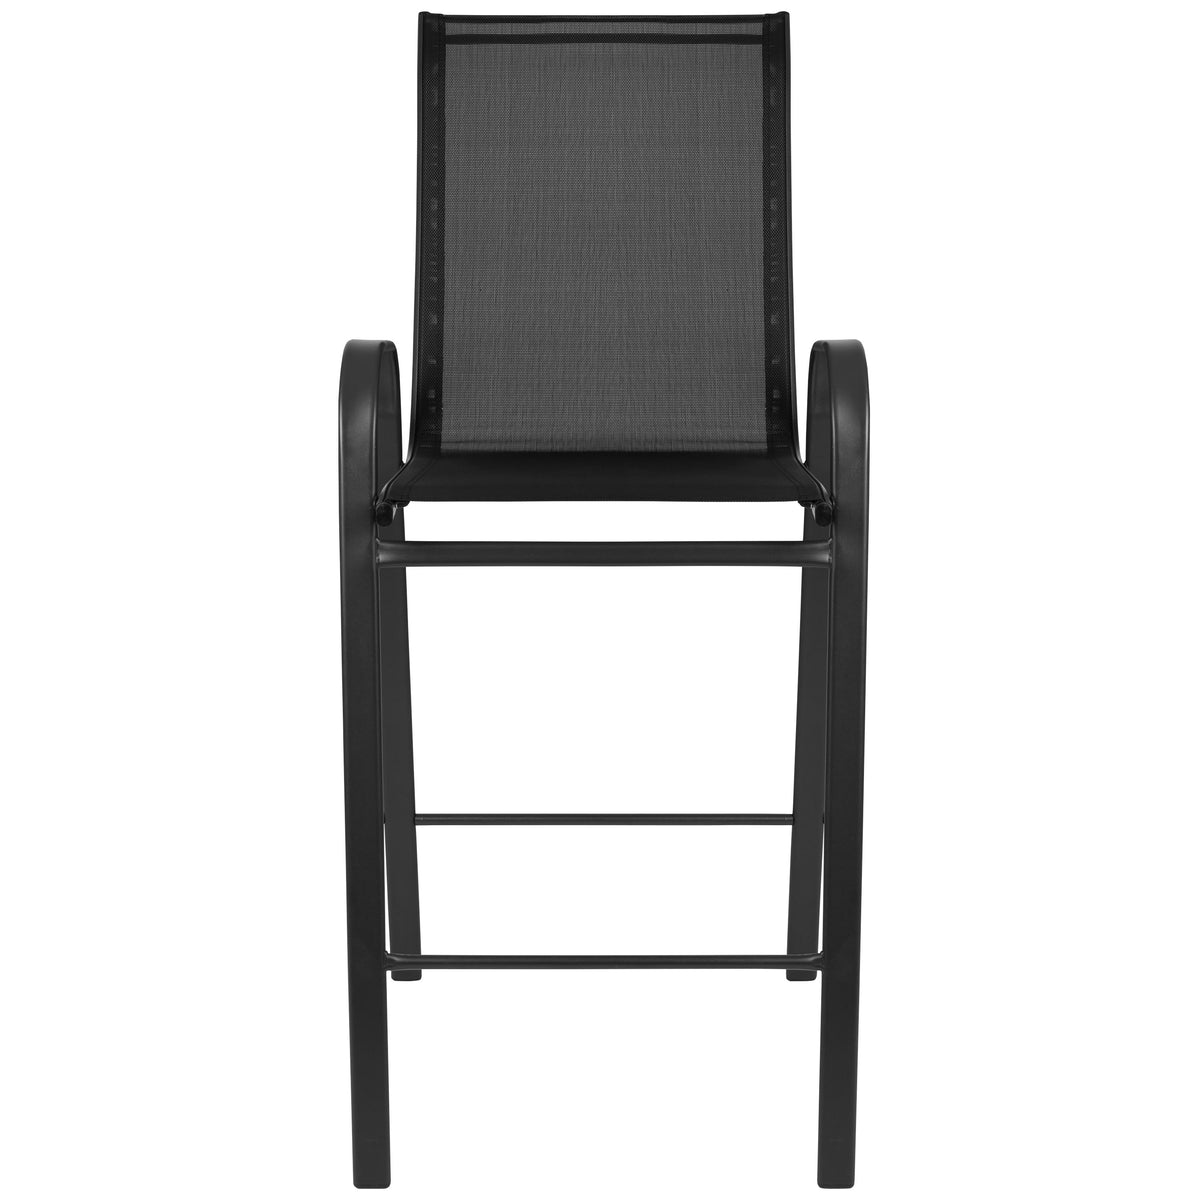 Black |#| 2 Pack Black Outdoor Barstools with Flex Comfort Material-Patio Stool